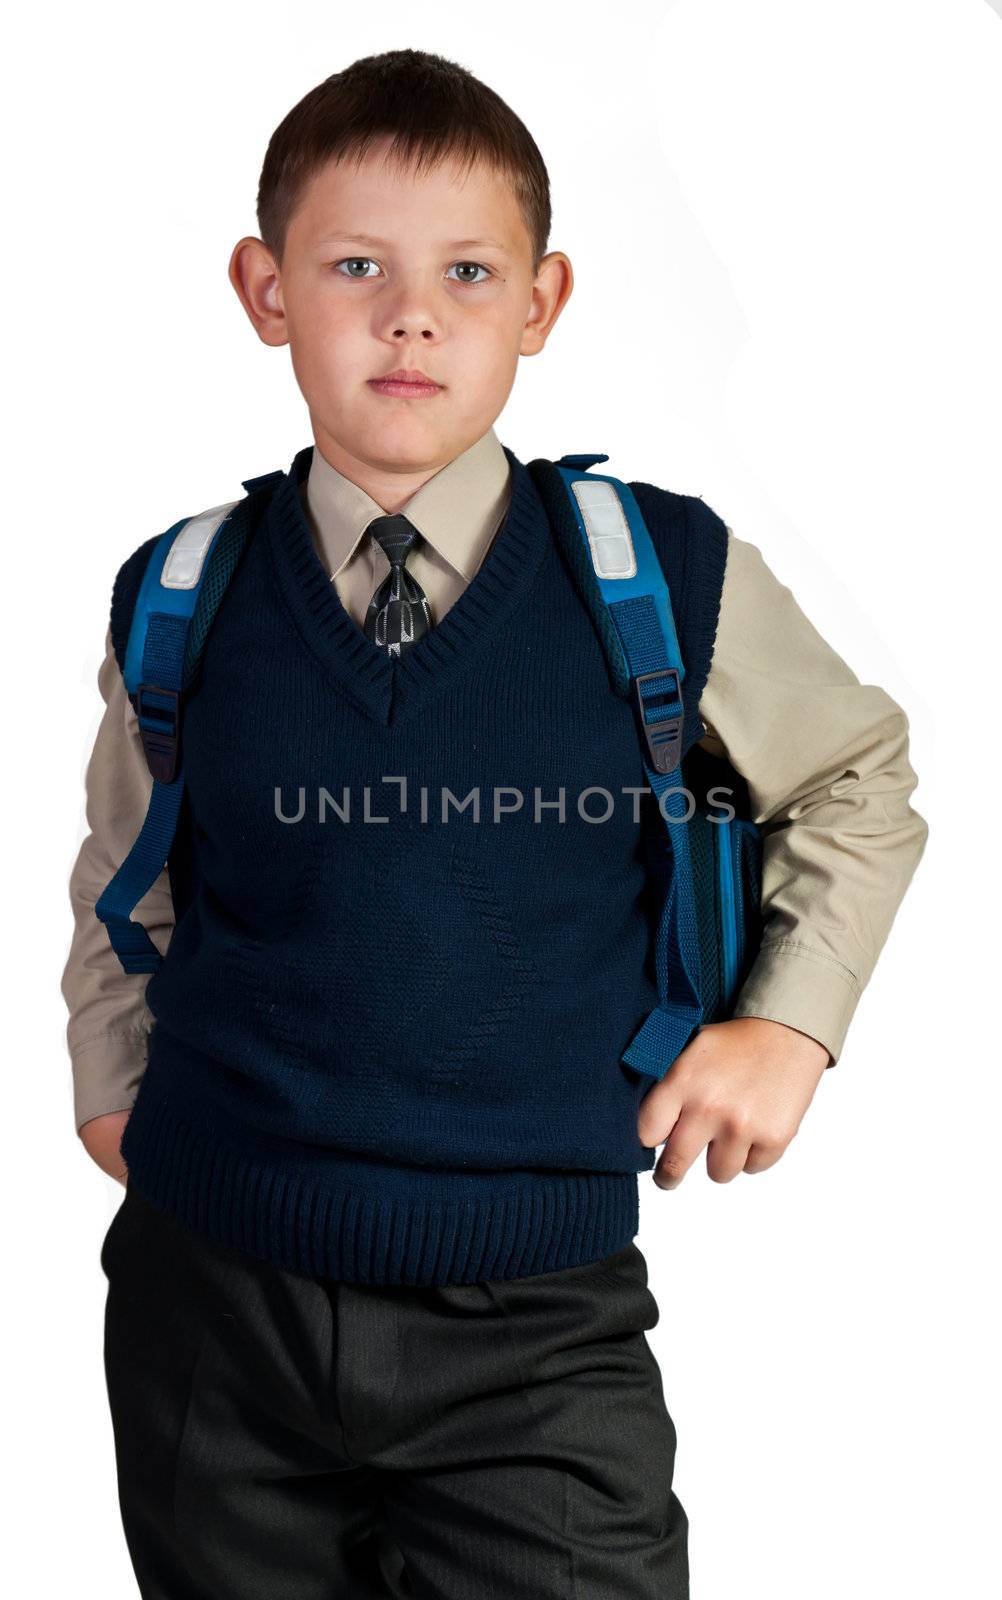 Schoolboy by rook